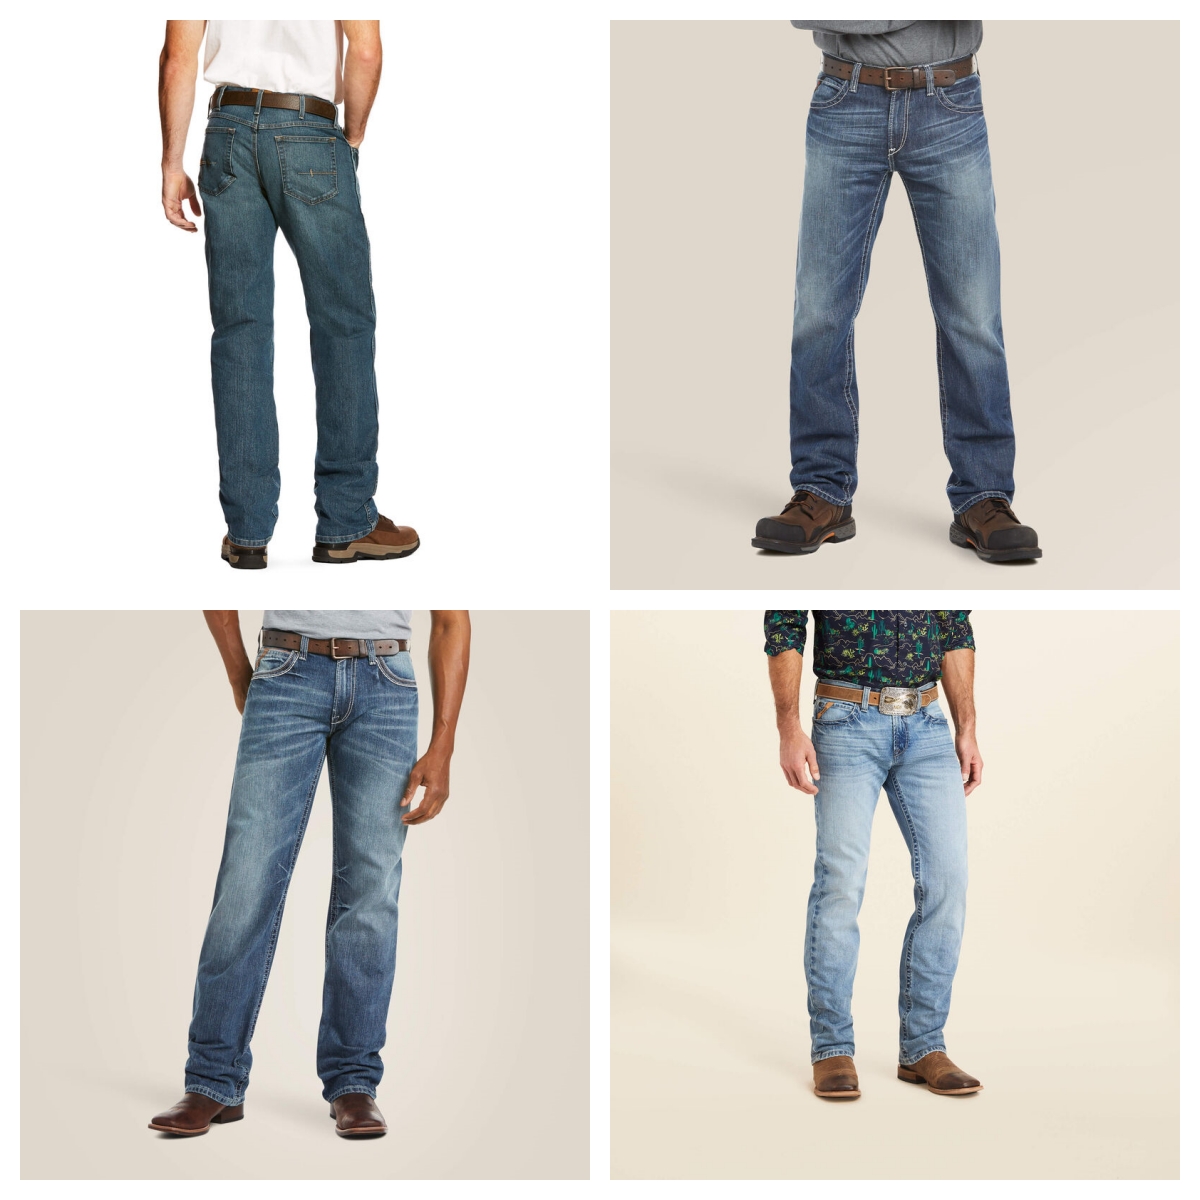 Top 8 Men’s Denim Choices From Ariat: Combining Style, Comfort